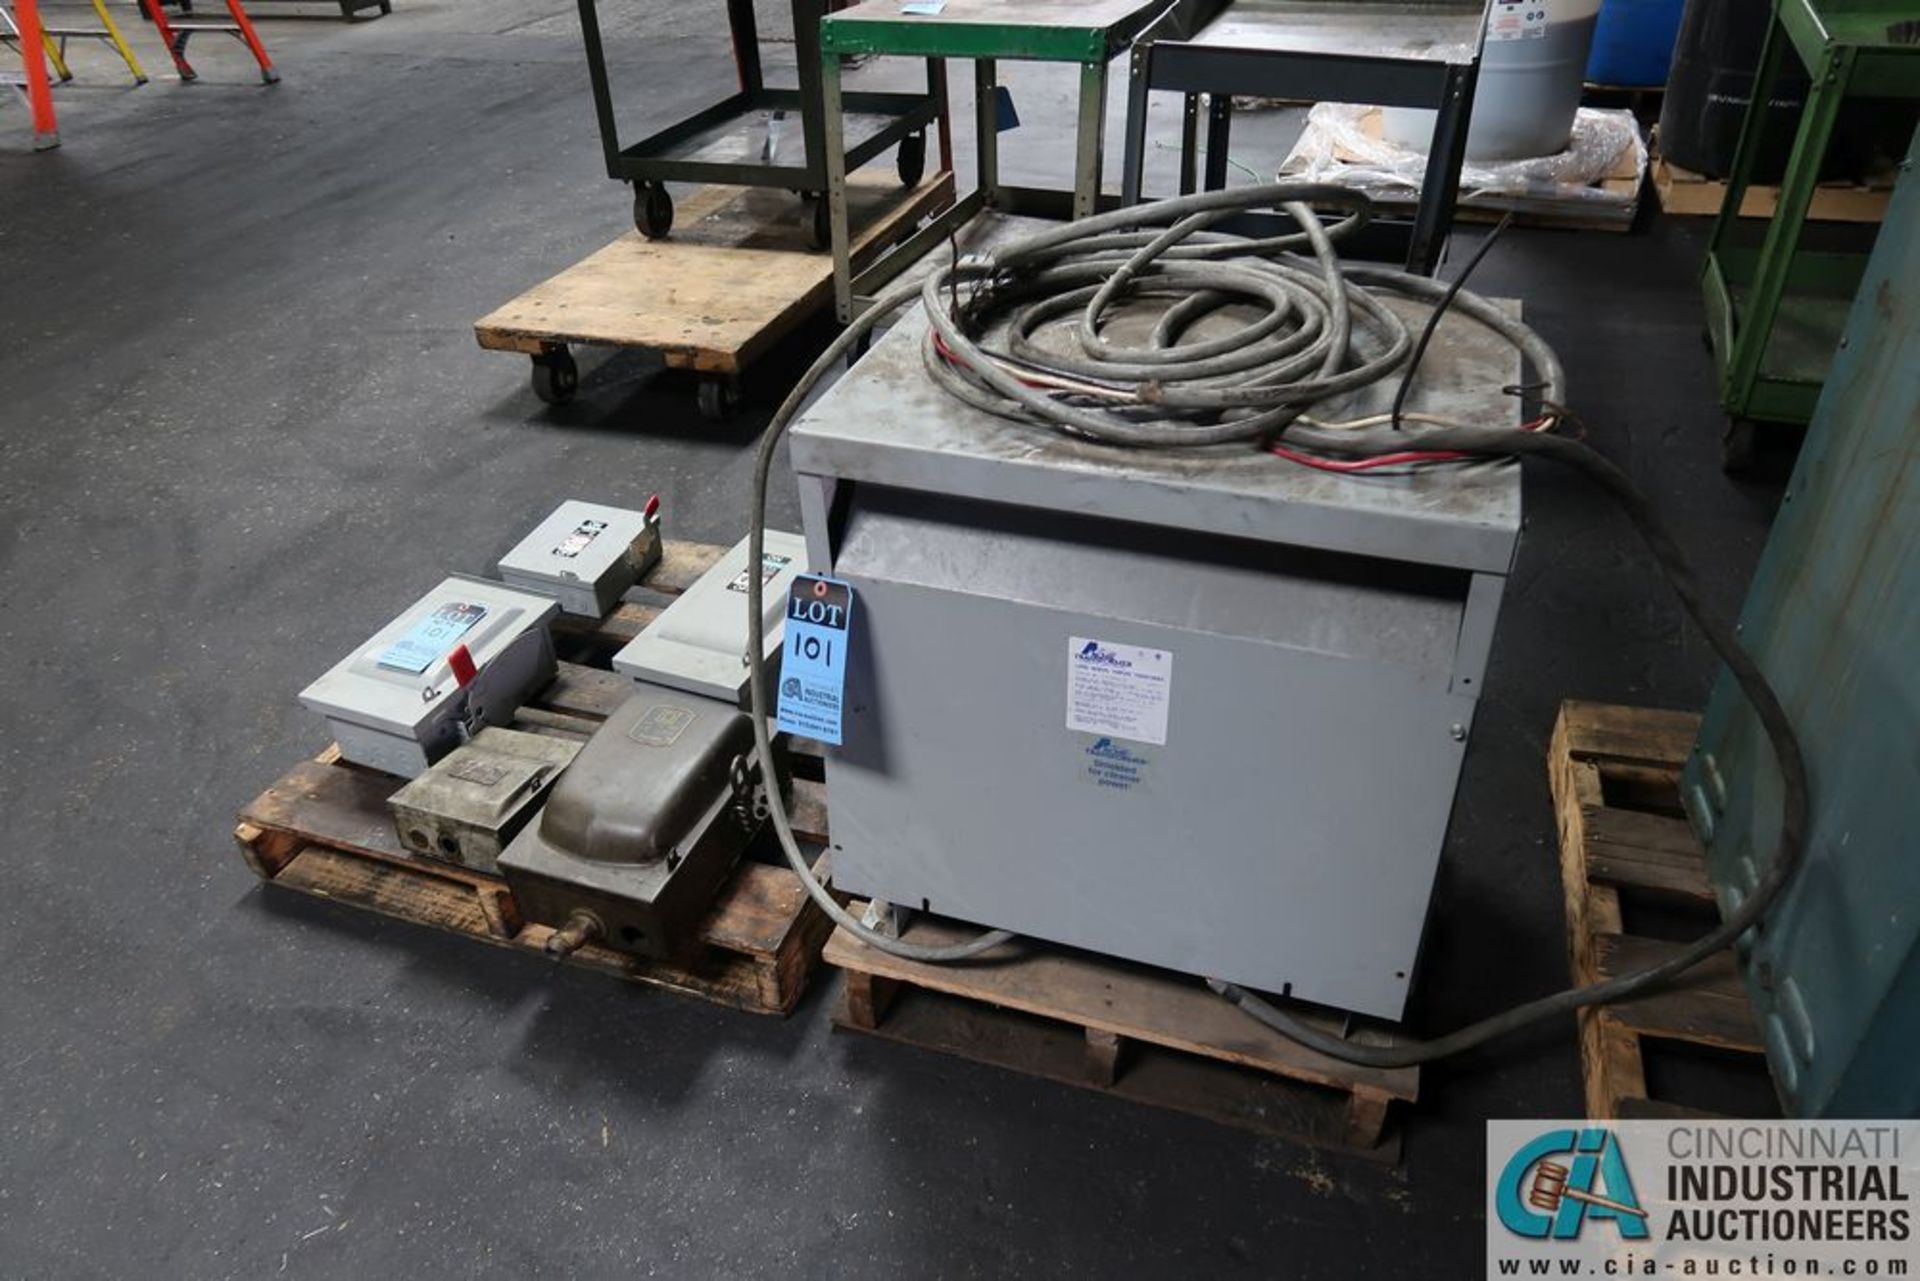 30-KVA ACME TRANSFORMER CO. GENERAL PURPOSE TRANSFORMER W/ (1) SKID SAFETY SWITCHES